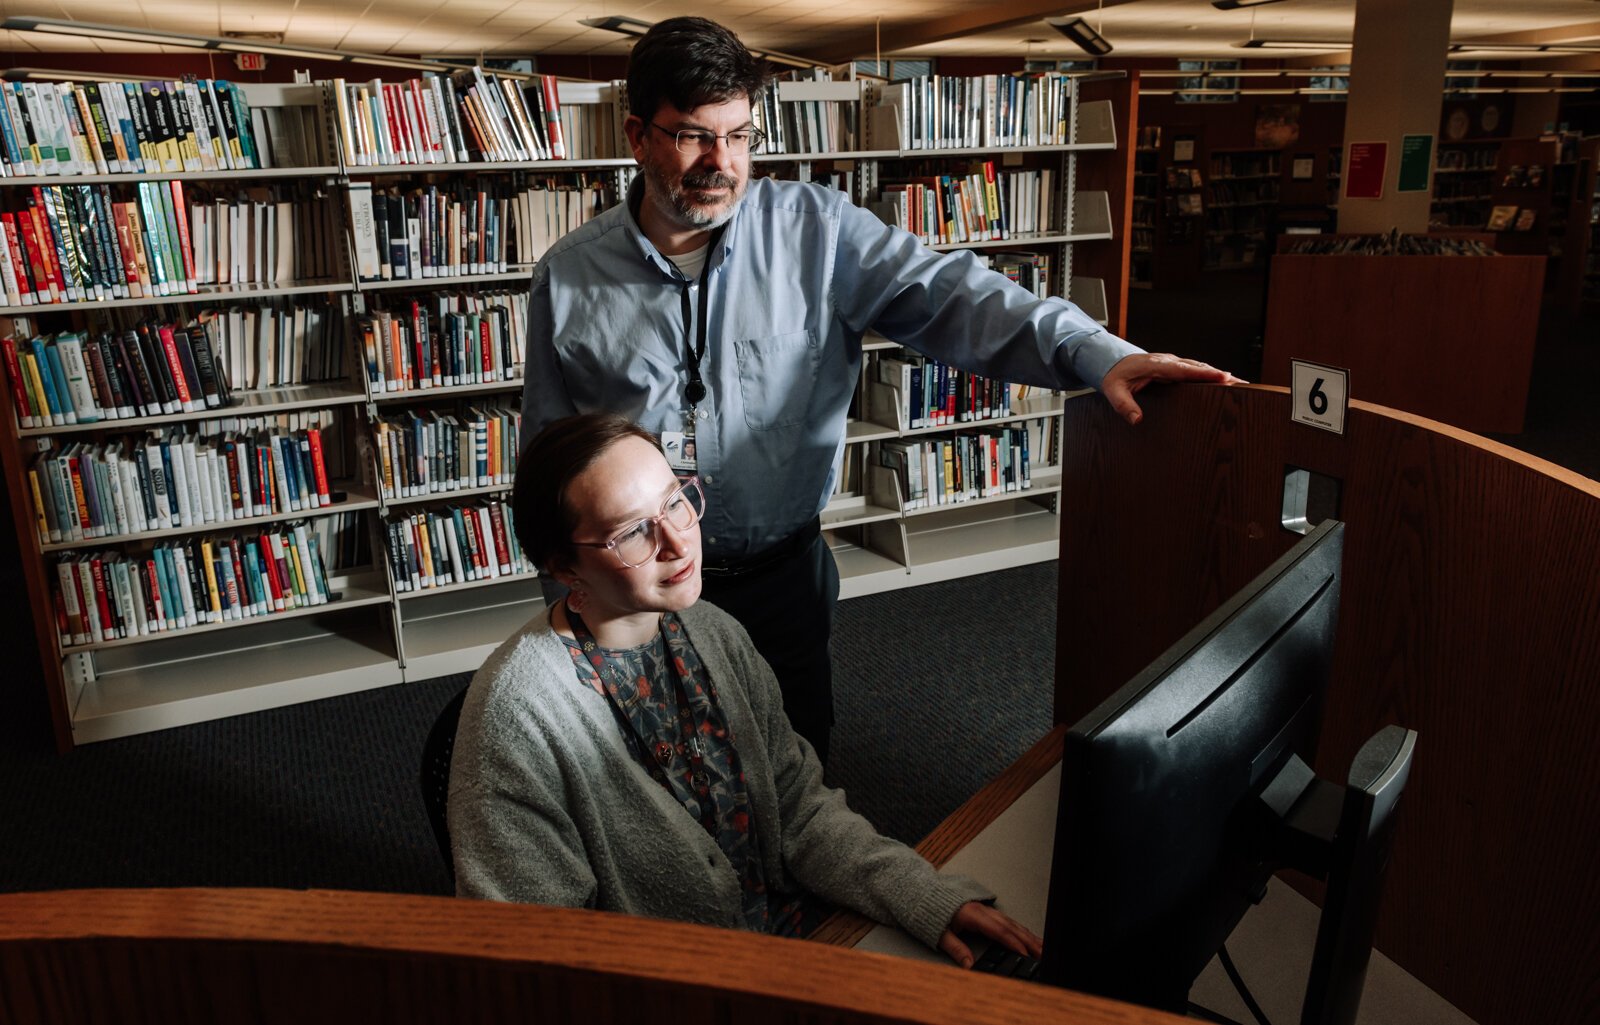 Branch Manager Christopher R. Wiljer helps Librarian Kristina Lay with the computer at the Allen County Public Library's Monroeville branch.